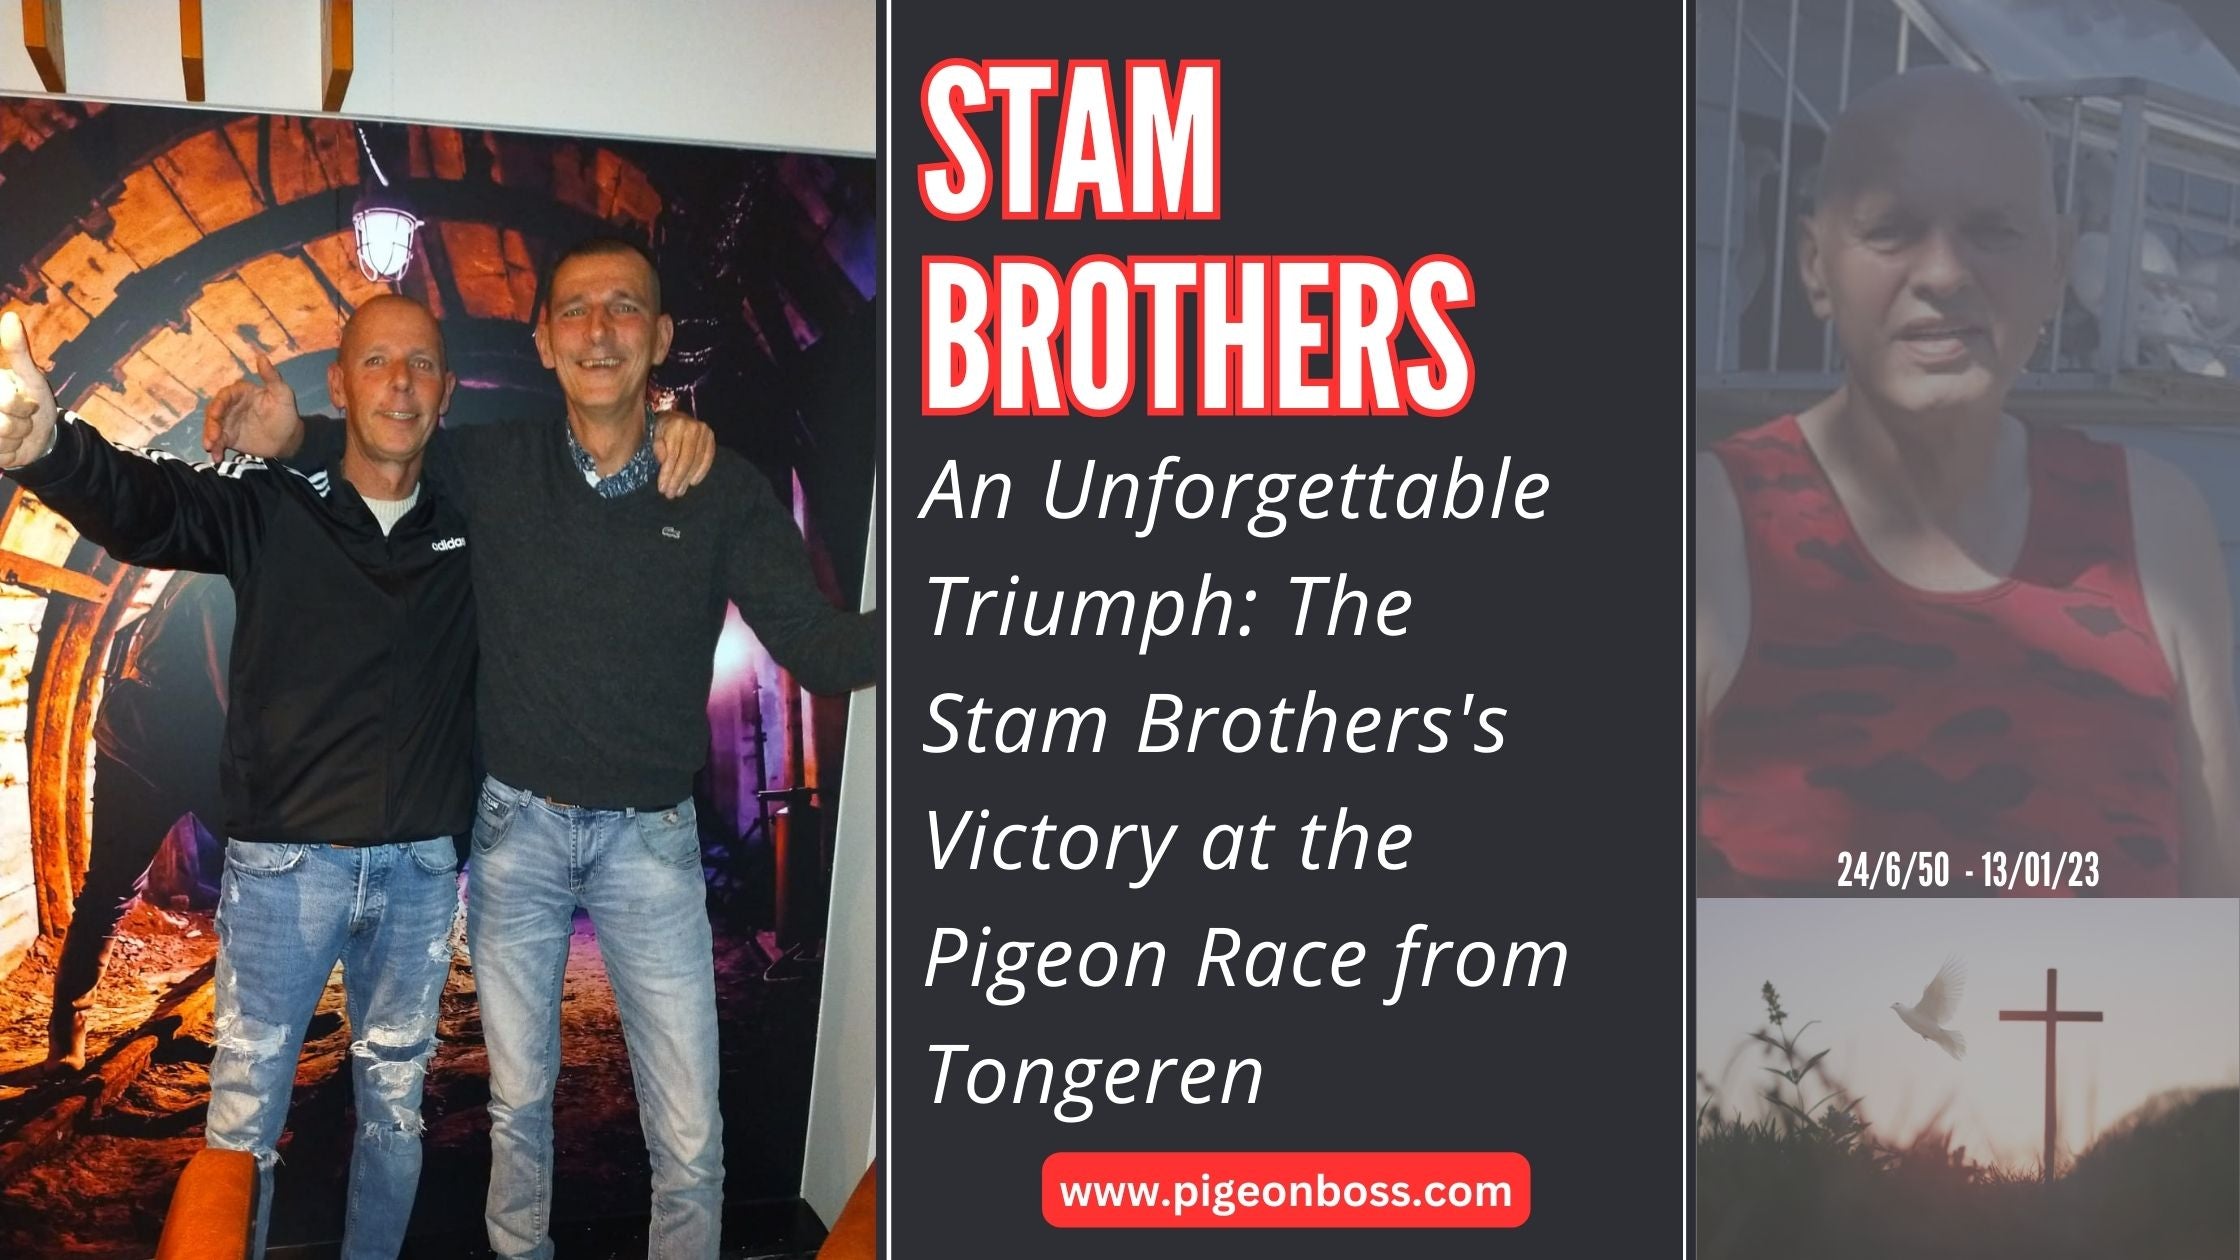 An Unforgettable Triumph: The Stam Brothers's Victory at the Pigeon Race from Tongeren